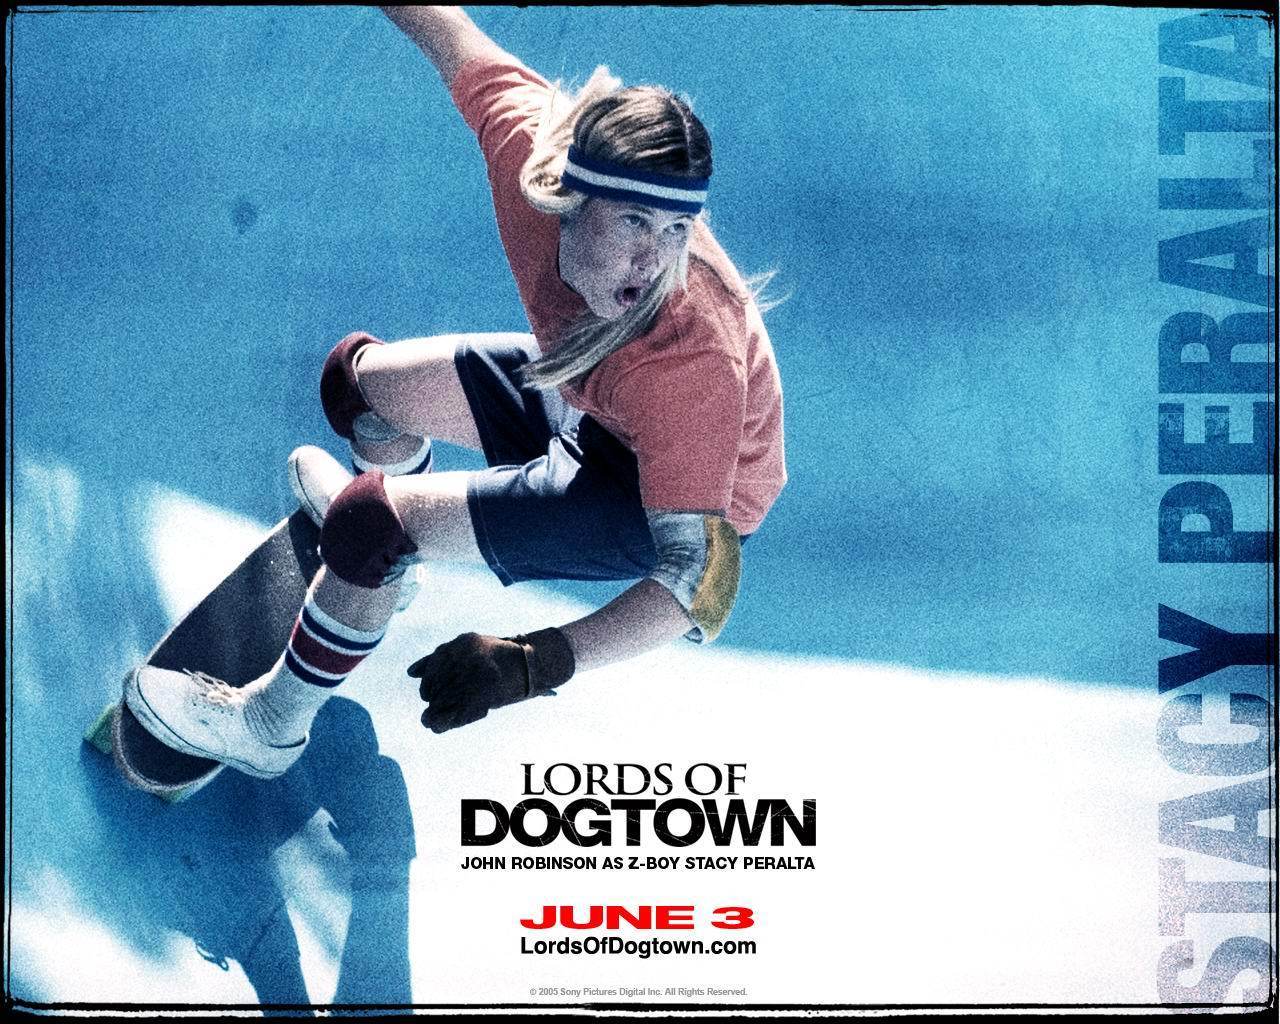 Stacy Peralta Of Dogtown wallpaper